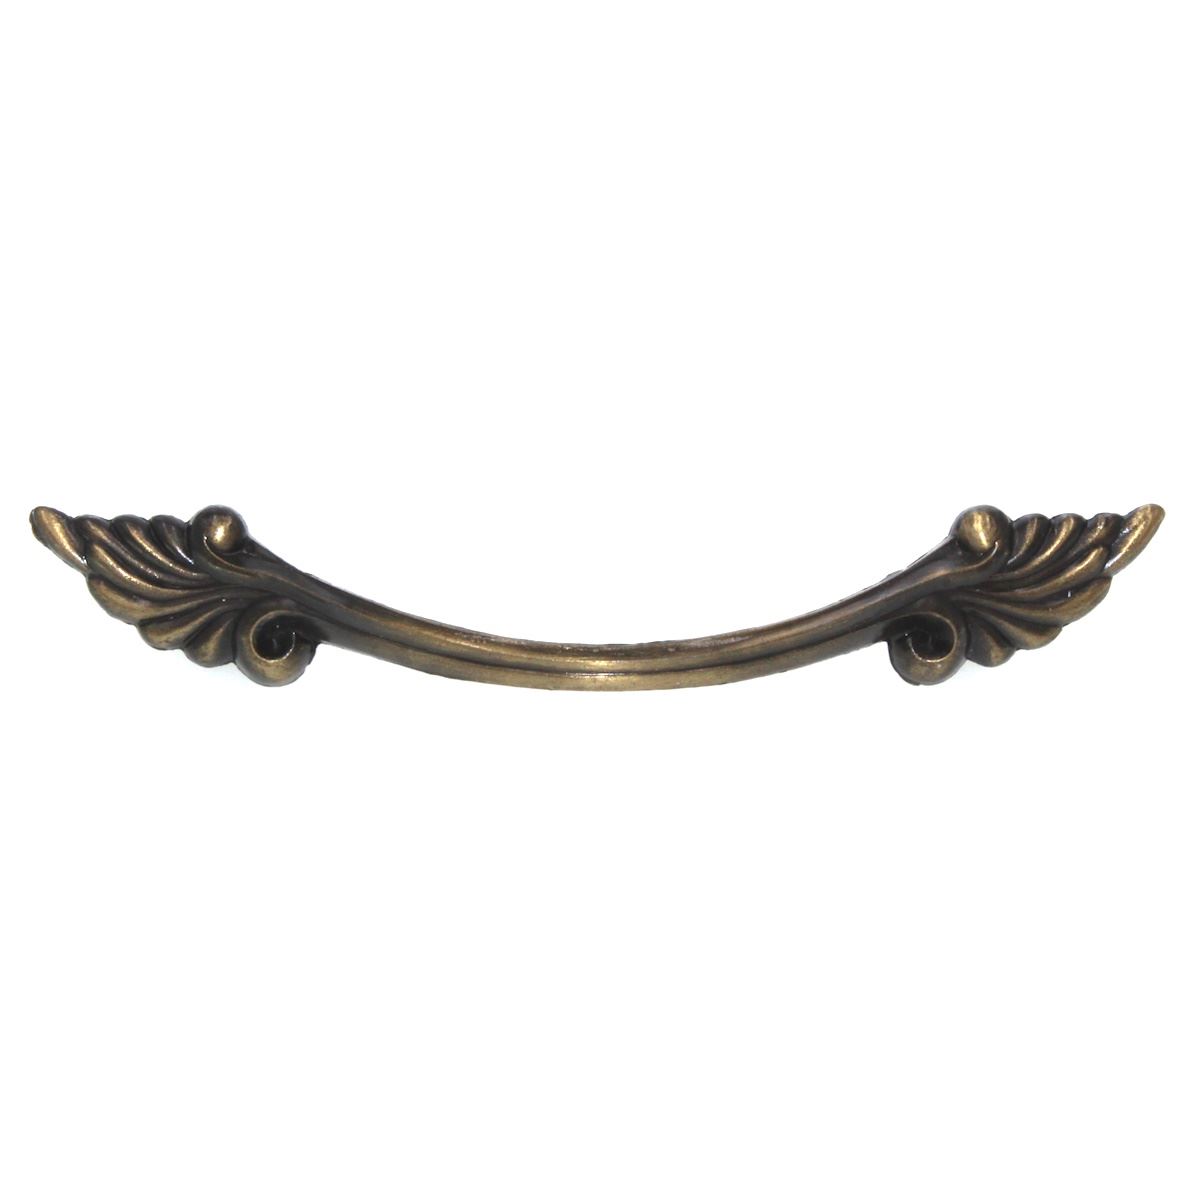 Provincial Winged Cabinet Arch Pull 3" Ctr Antique Brass 371-AB